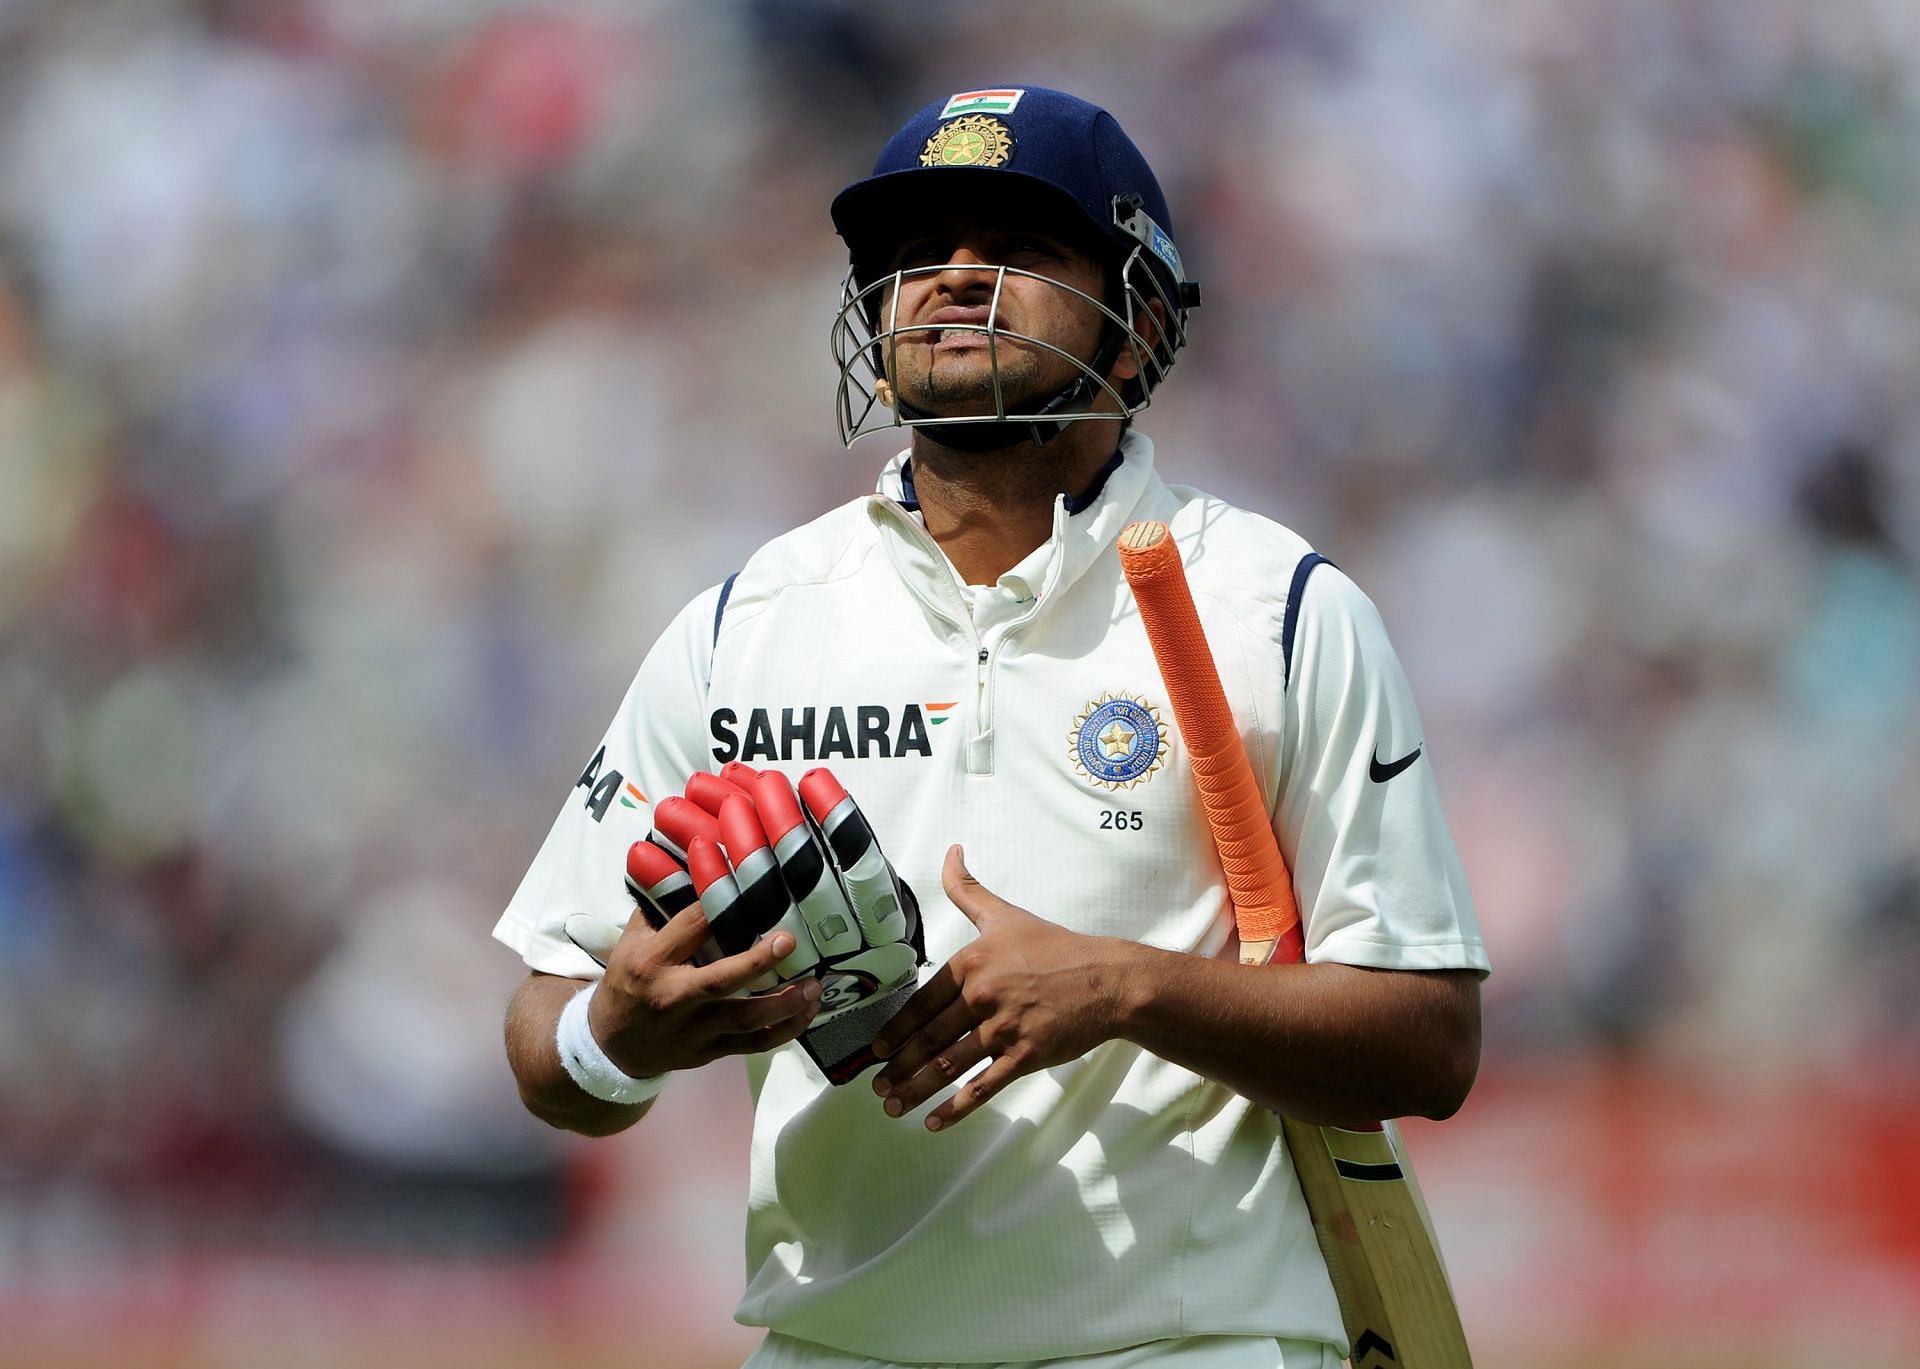 Suresh Raina struggled to make an impact in Test cricket. Pic: Getty Images